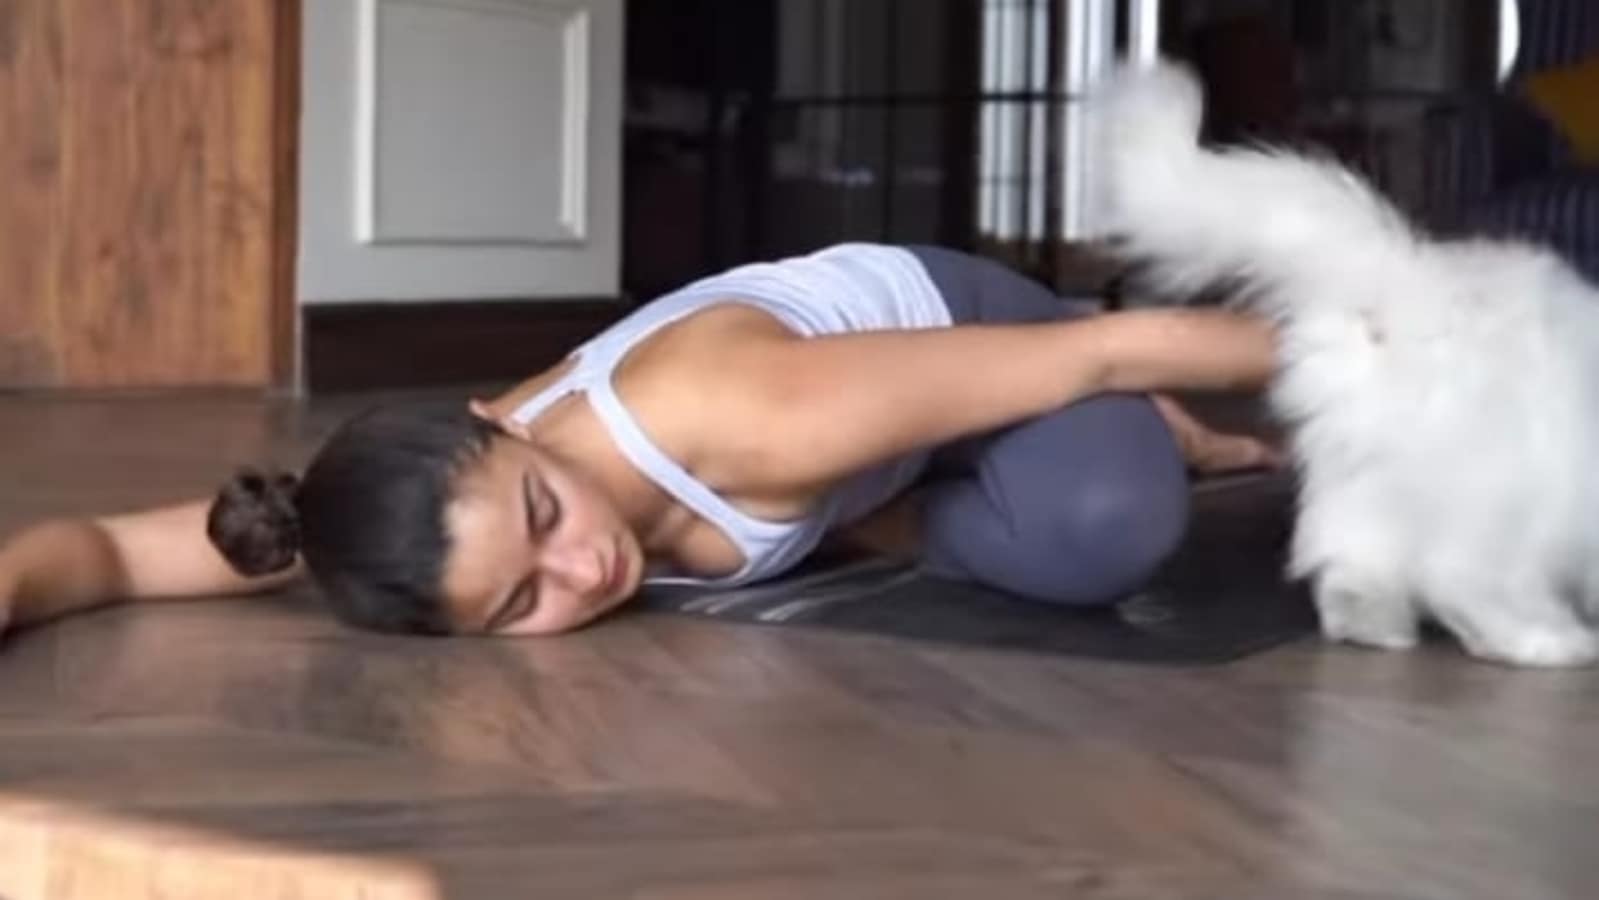 Alia Bhatt’s cat Edward features in her workout video: ‘Happy Yoga Day from my yoga partner and me’. Watch